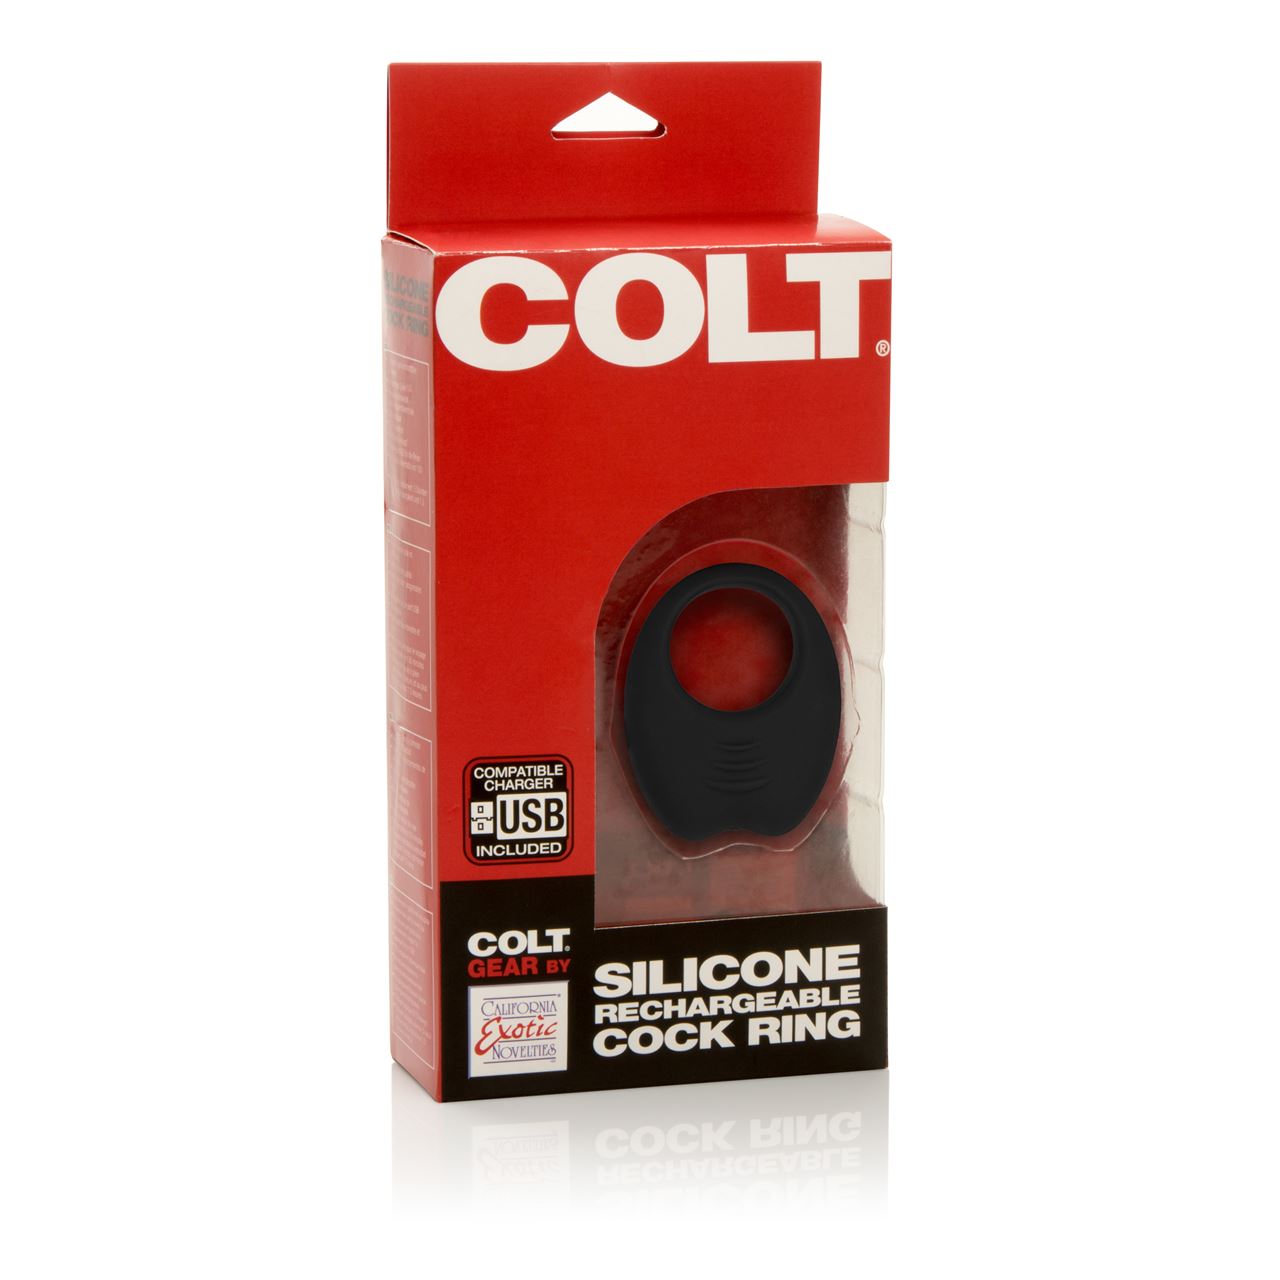 COLT Silicone Rechargeable Cock Ring - Black - UABDSM